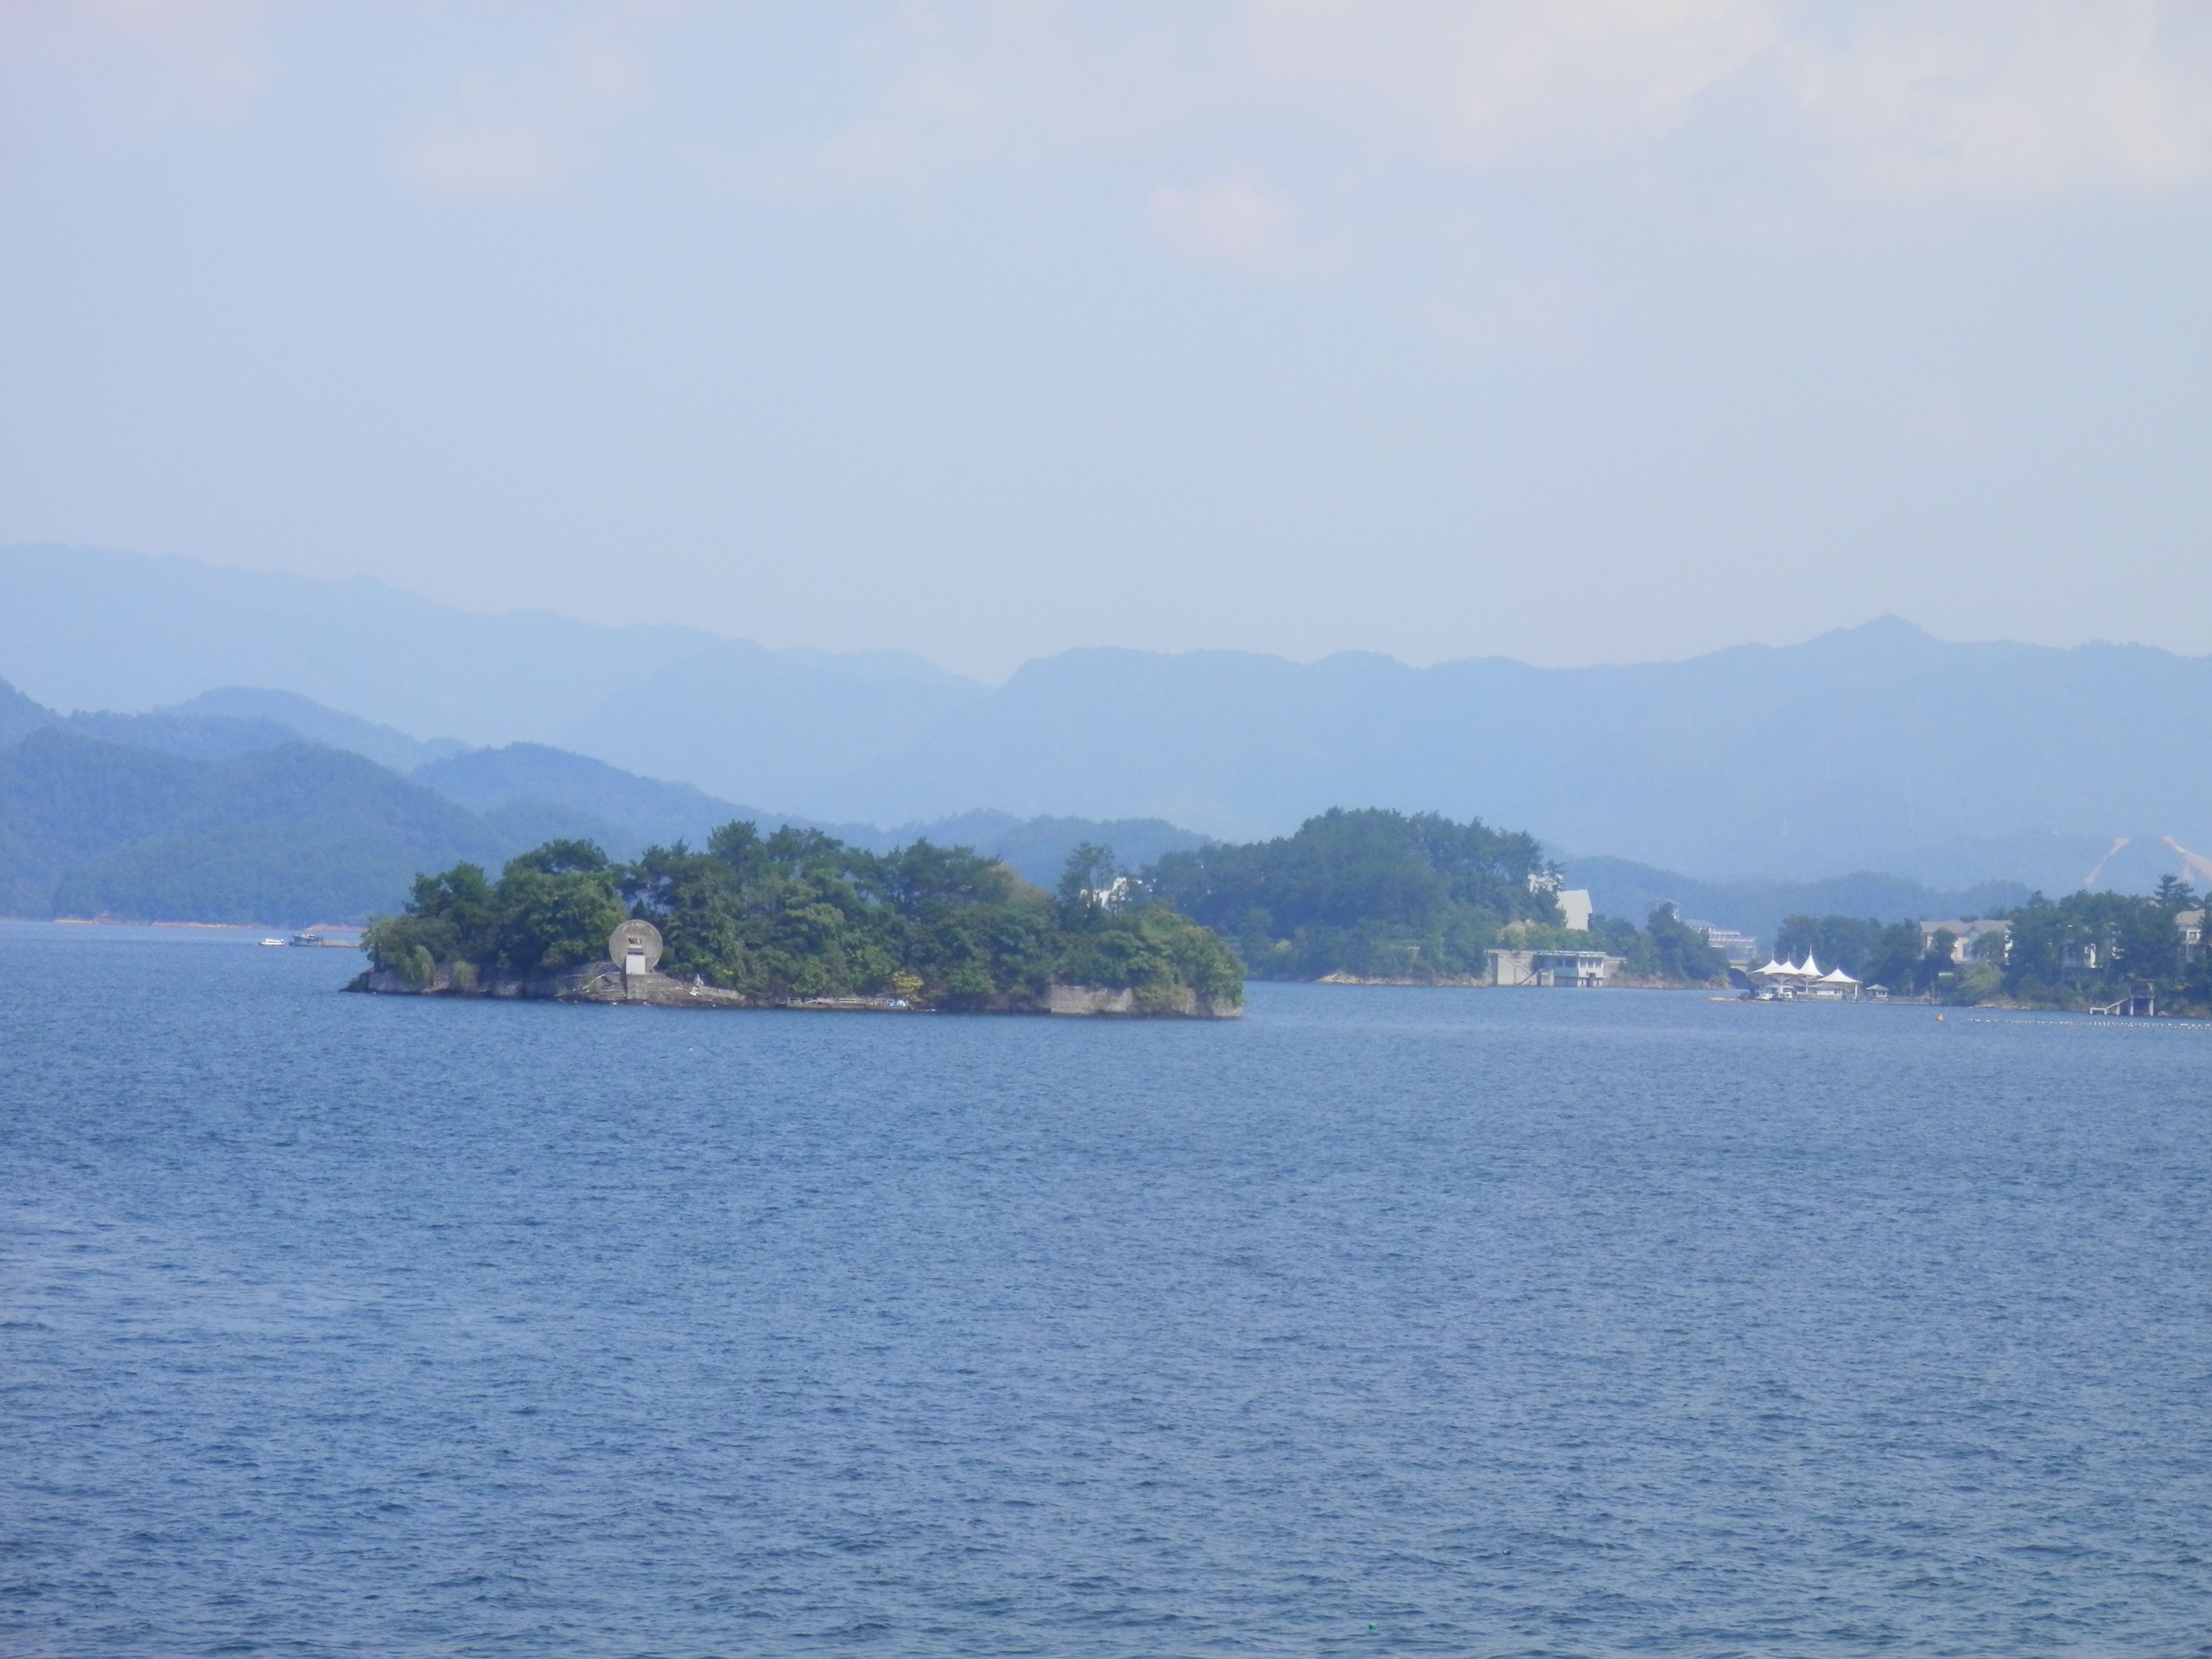 It is located in thousand island lake in zhejiang province. Isn't it ...